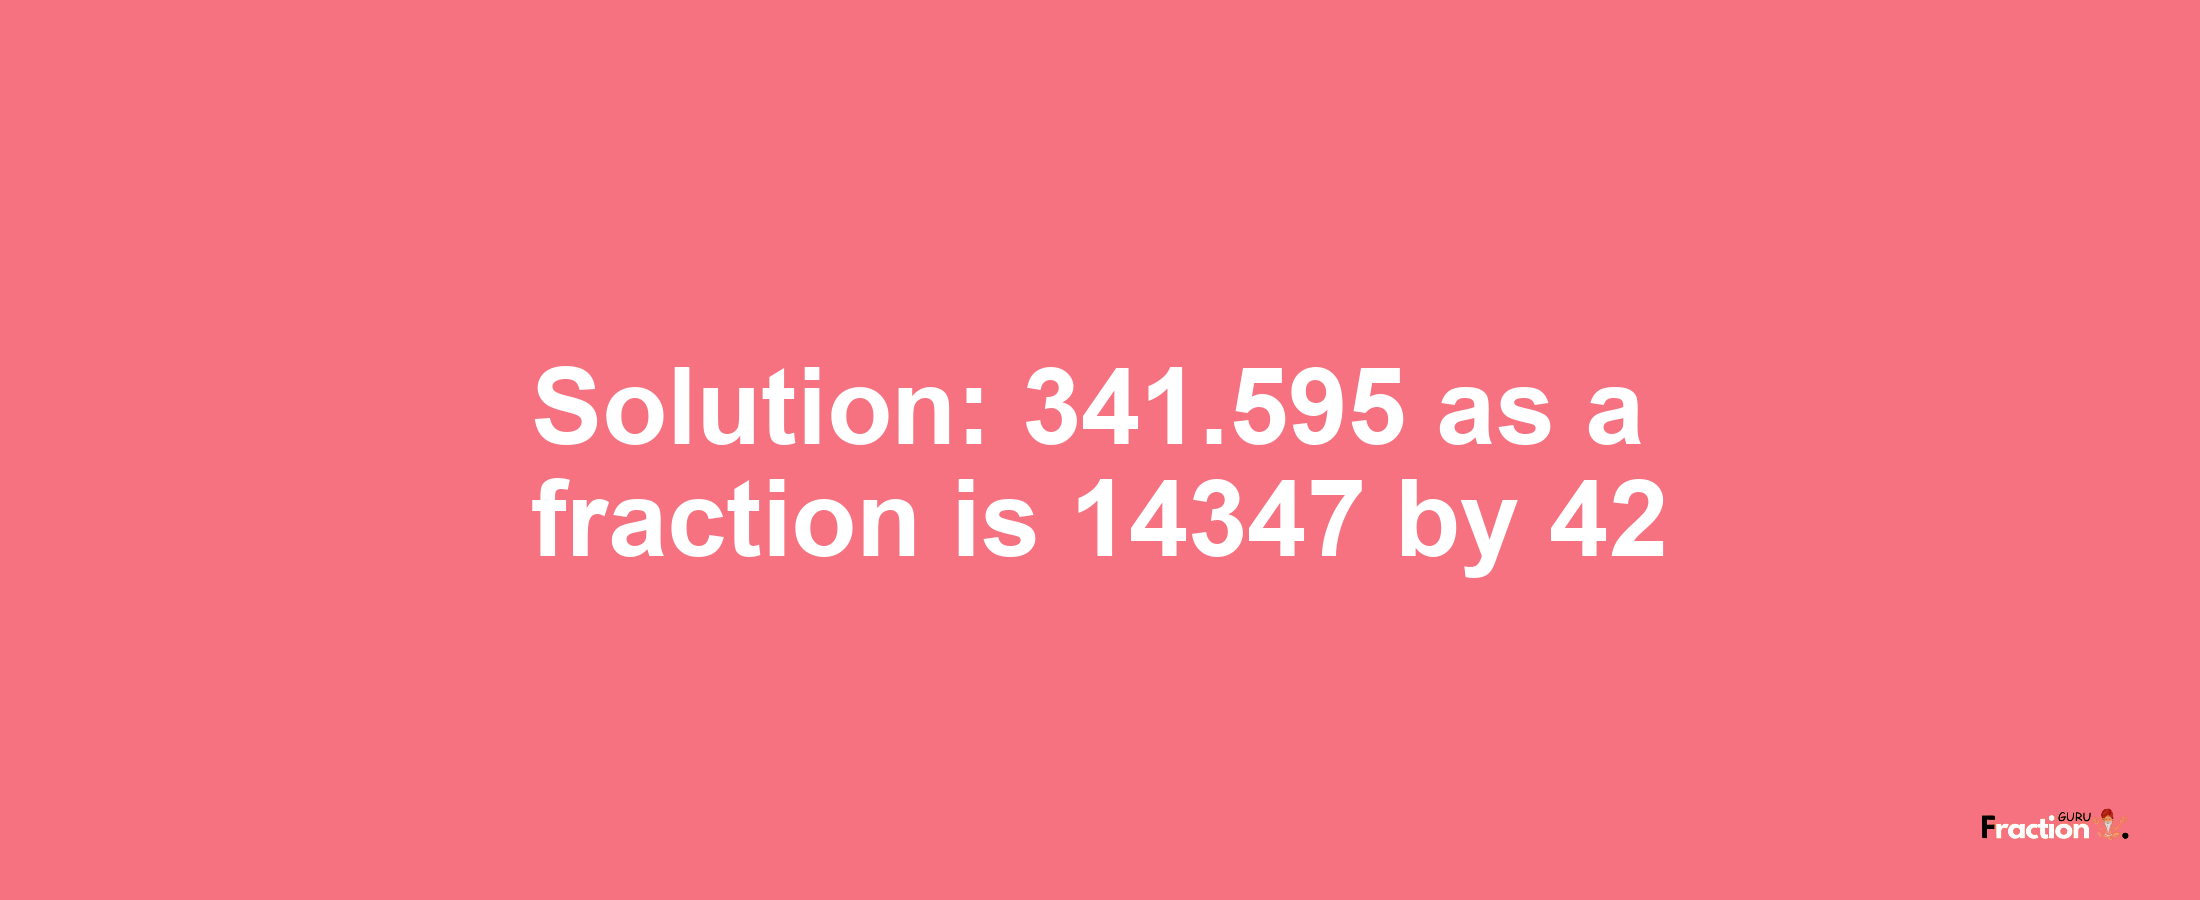 Solution:341.595 as a fraction is 14347/42